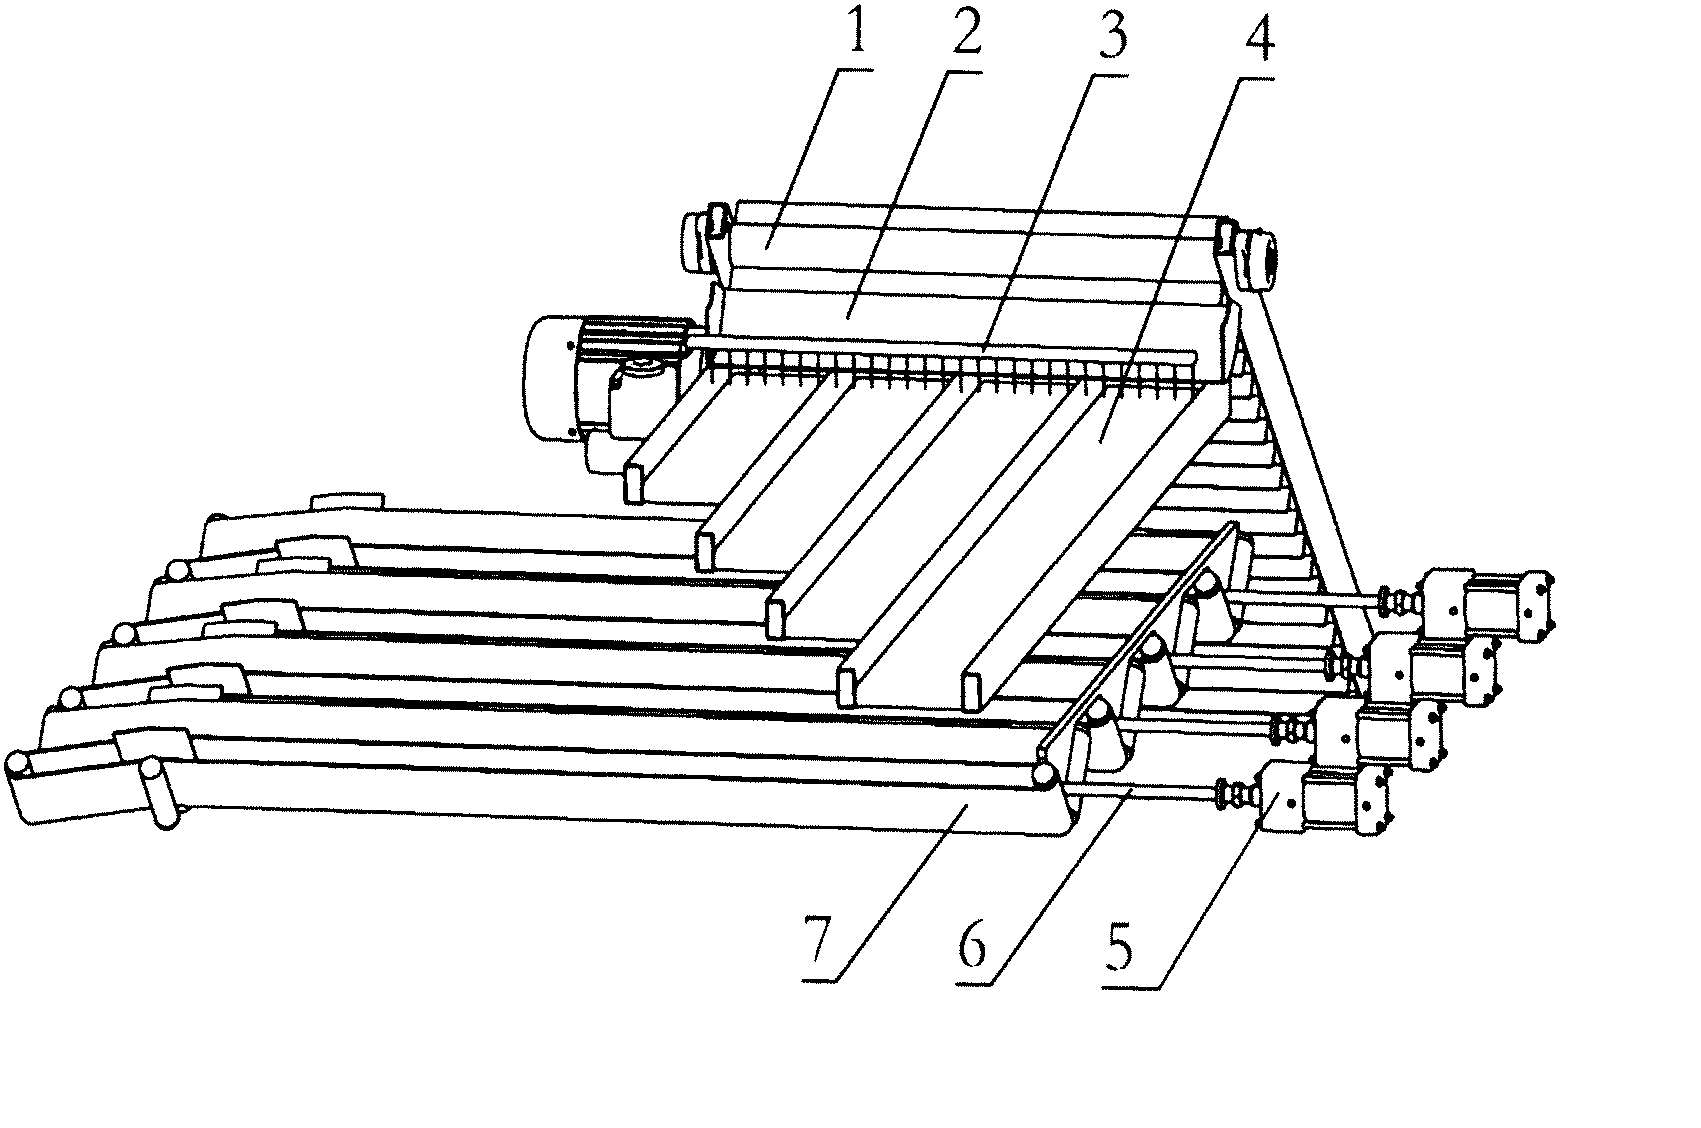 A multi-channel fruit and vegetable sorting machine with uniform feeding and single row sorting device